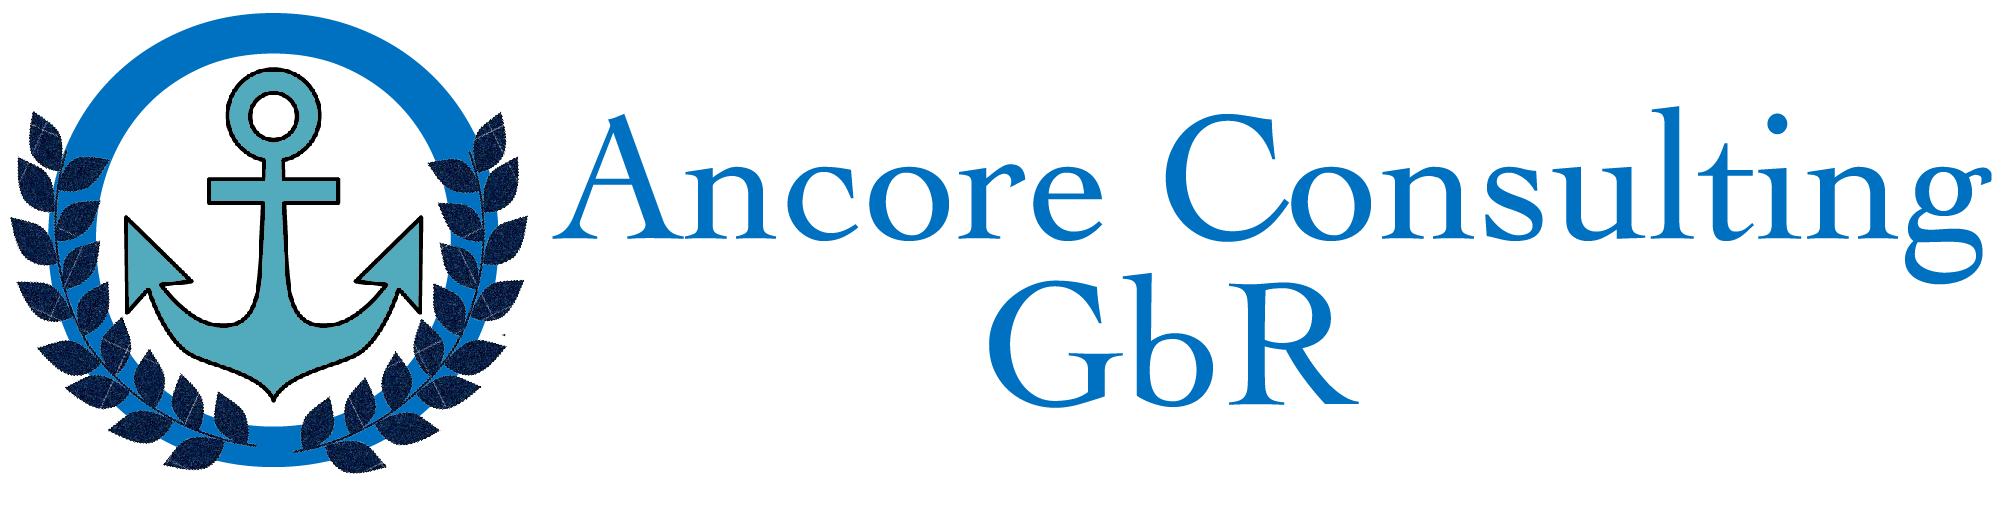 Ancore Consulting GbR